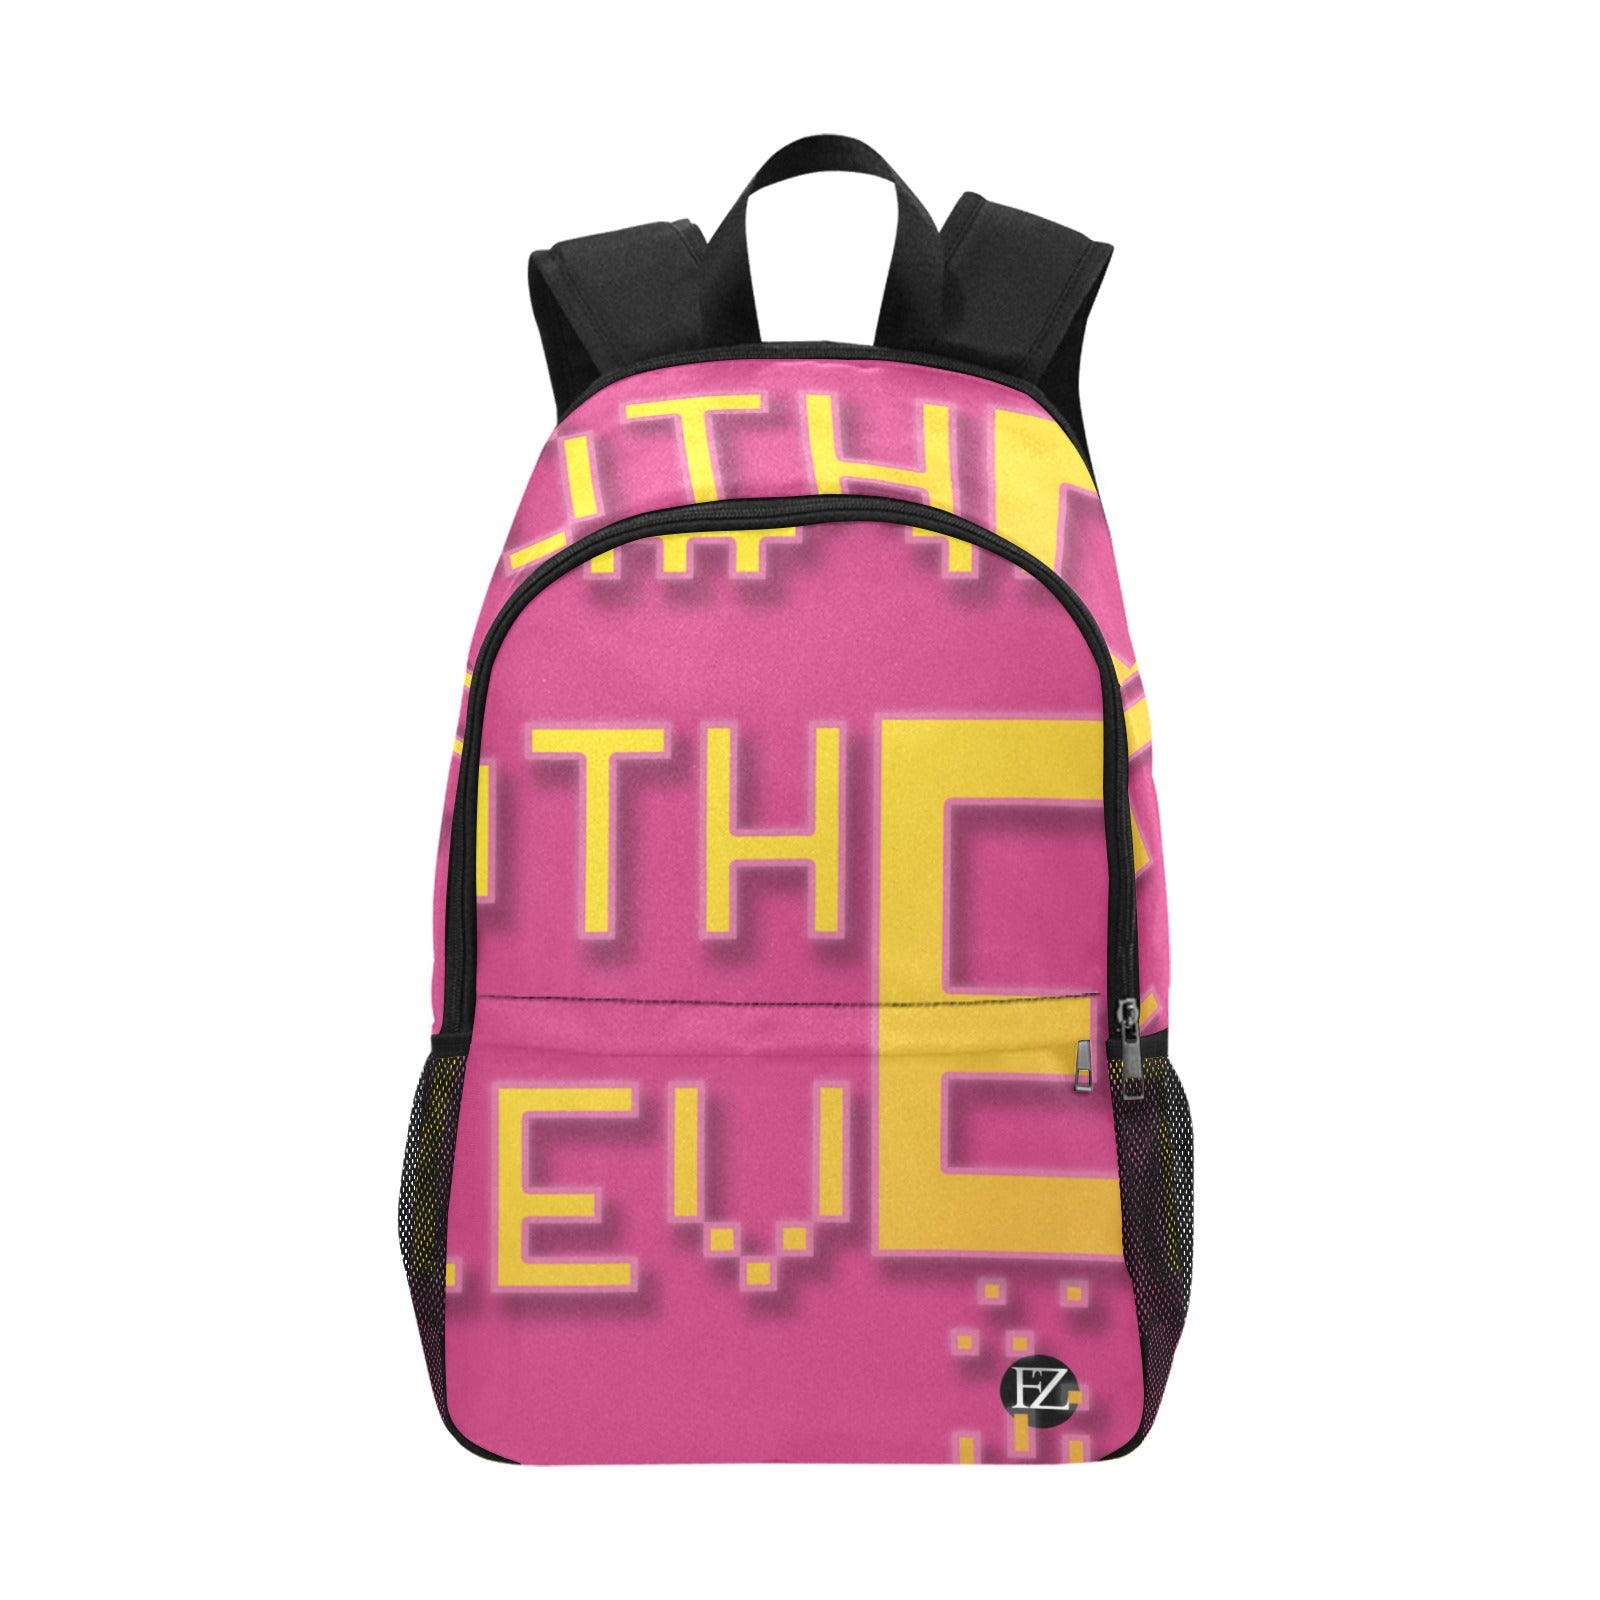 fz yellow levels backpack one size / fz levels backpack - fuchsia all-over print unisex casual backpack with side mesh pockets (model 1659)